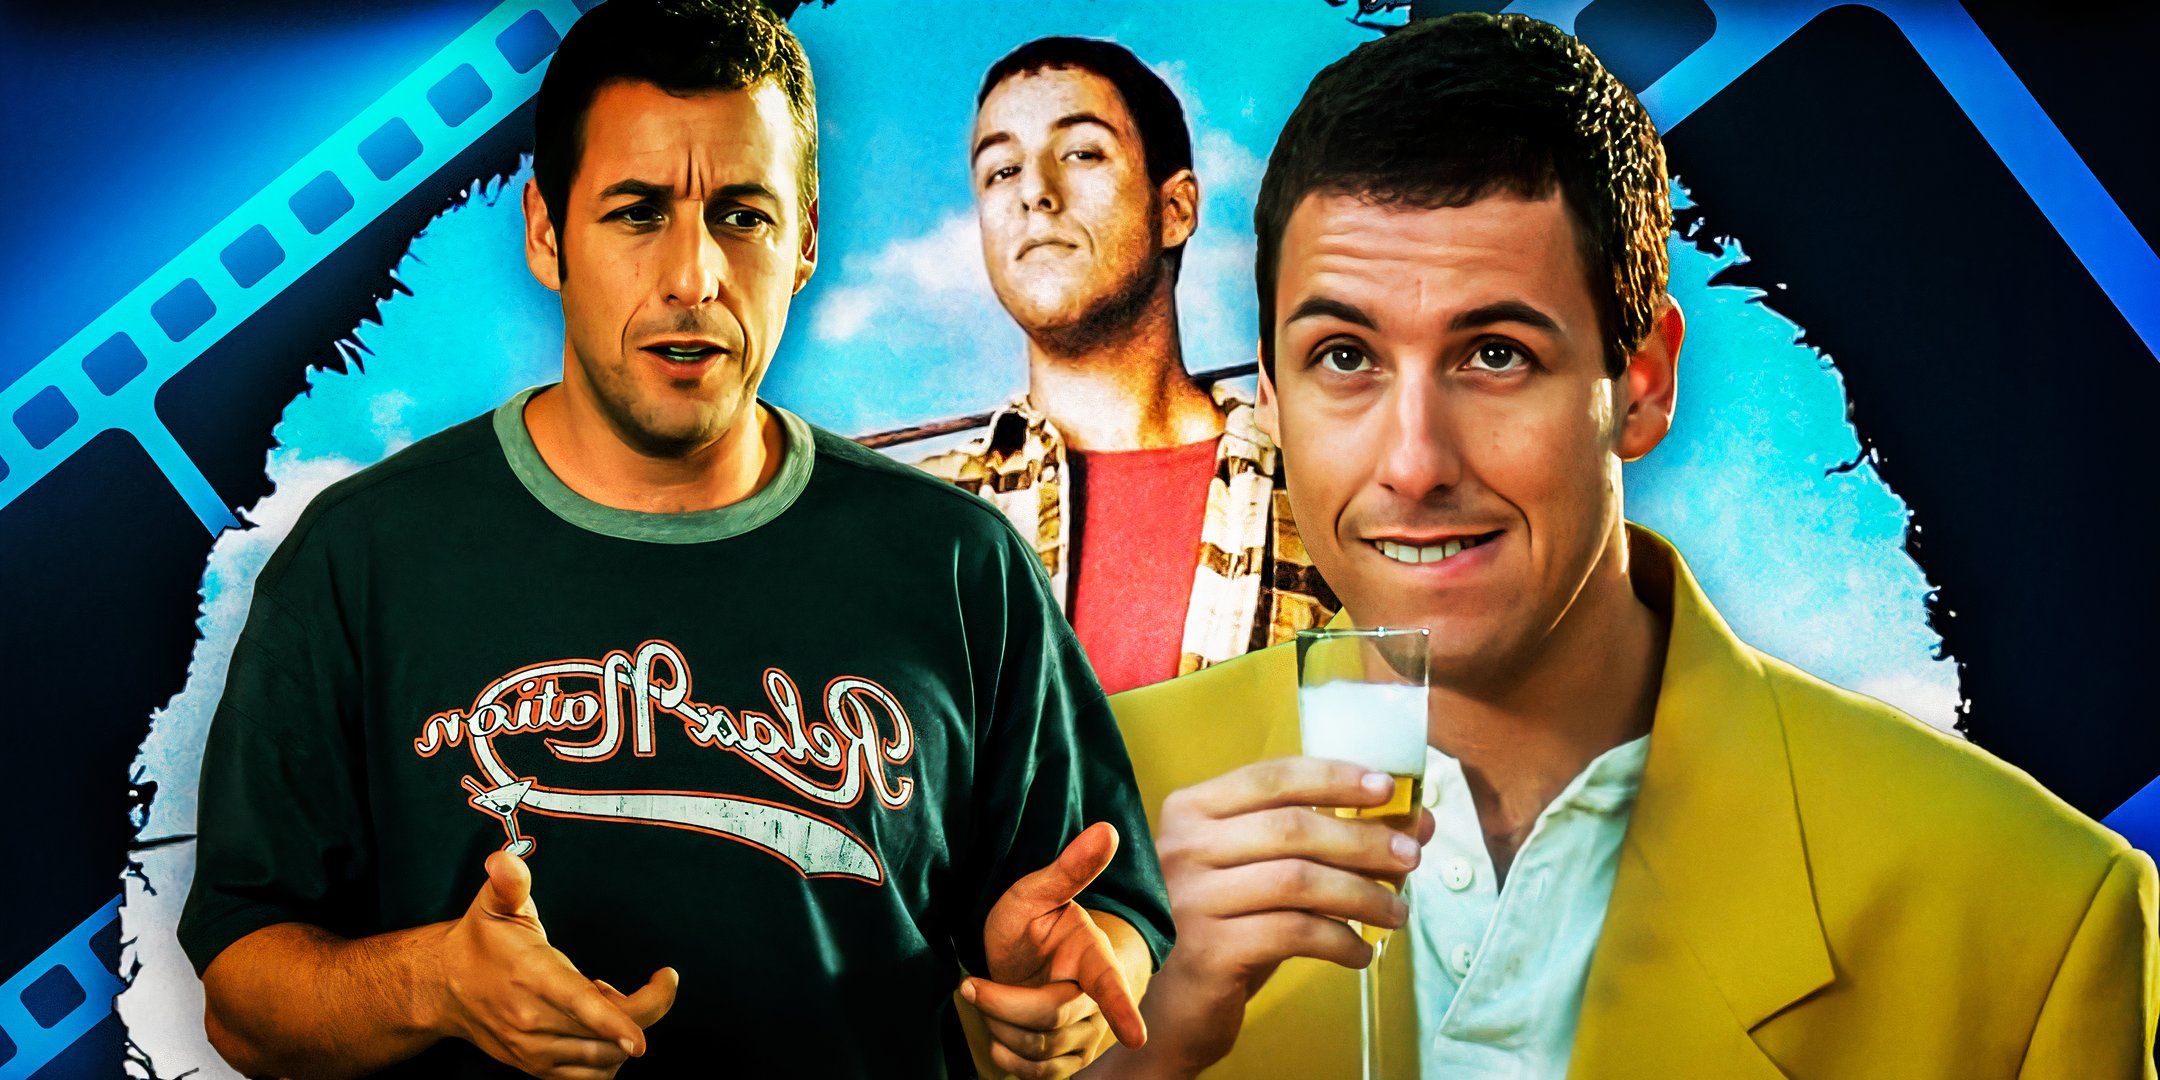 Adam-Sandler-as-Danny-from-Just-Go-with-It-and-Adam-Sandler-as-Happy-Gilmore-from-Happy-Gilmore